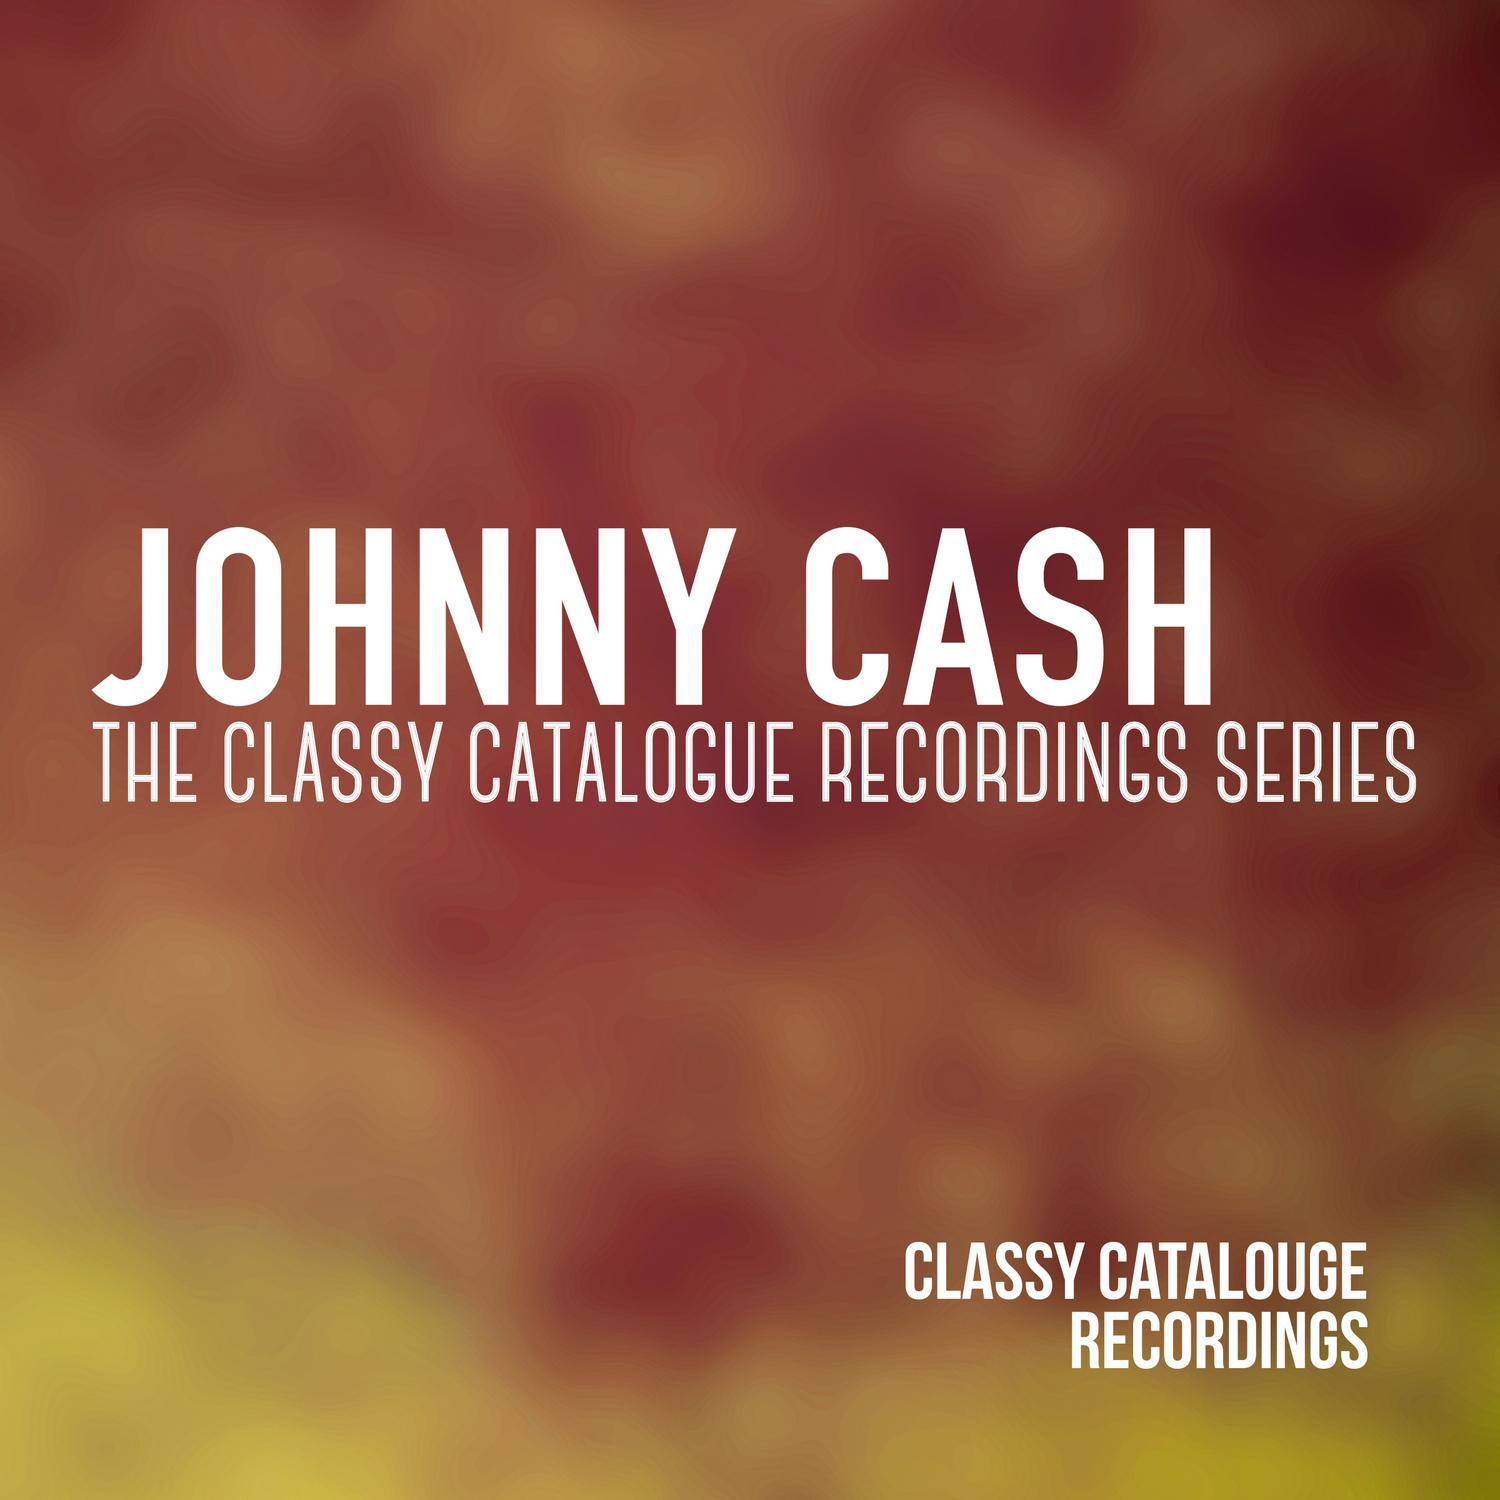 Johnny Cash - The Classy Catalogue Recordings Series